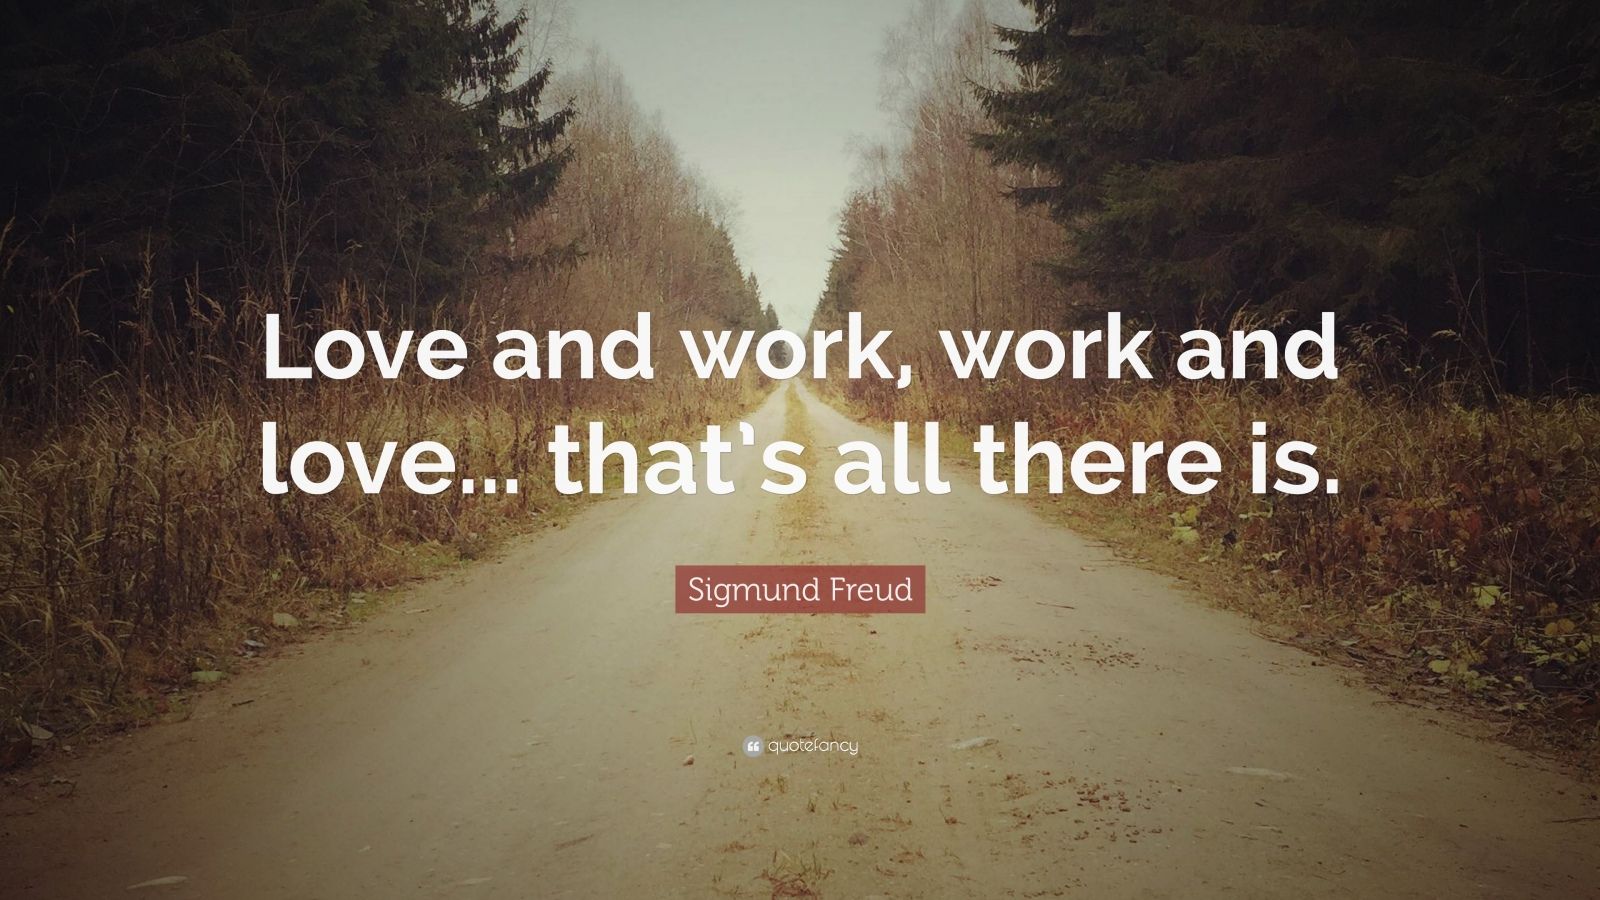 Sigmund Freud Quote: “Love and work, work and love... that’s all there